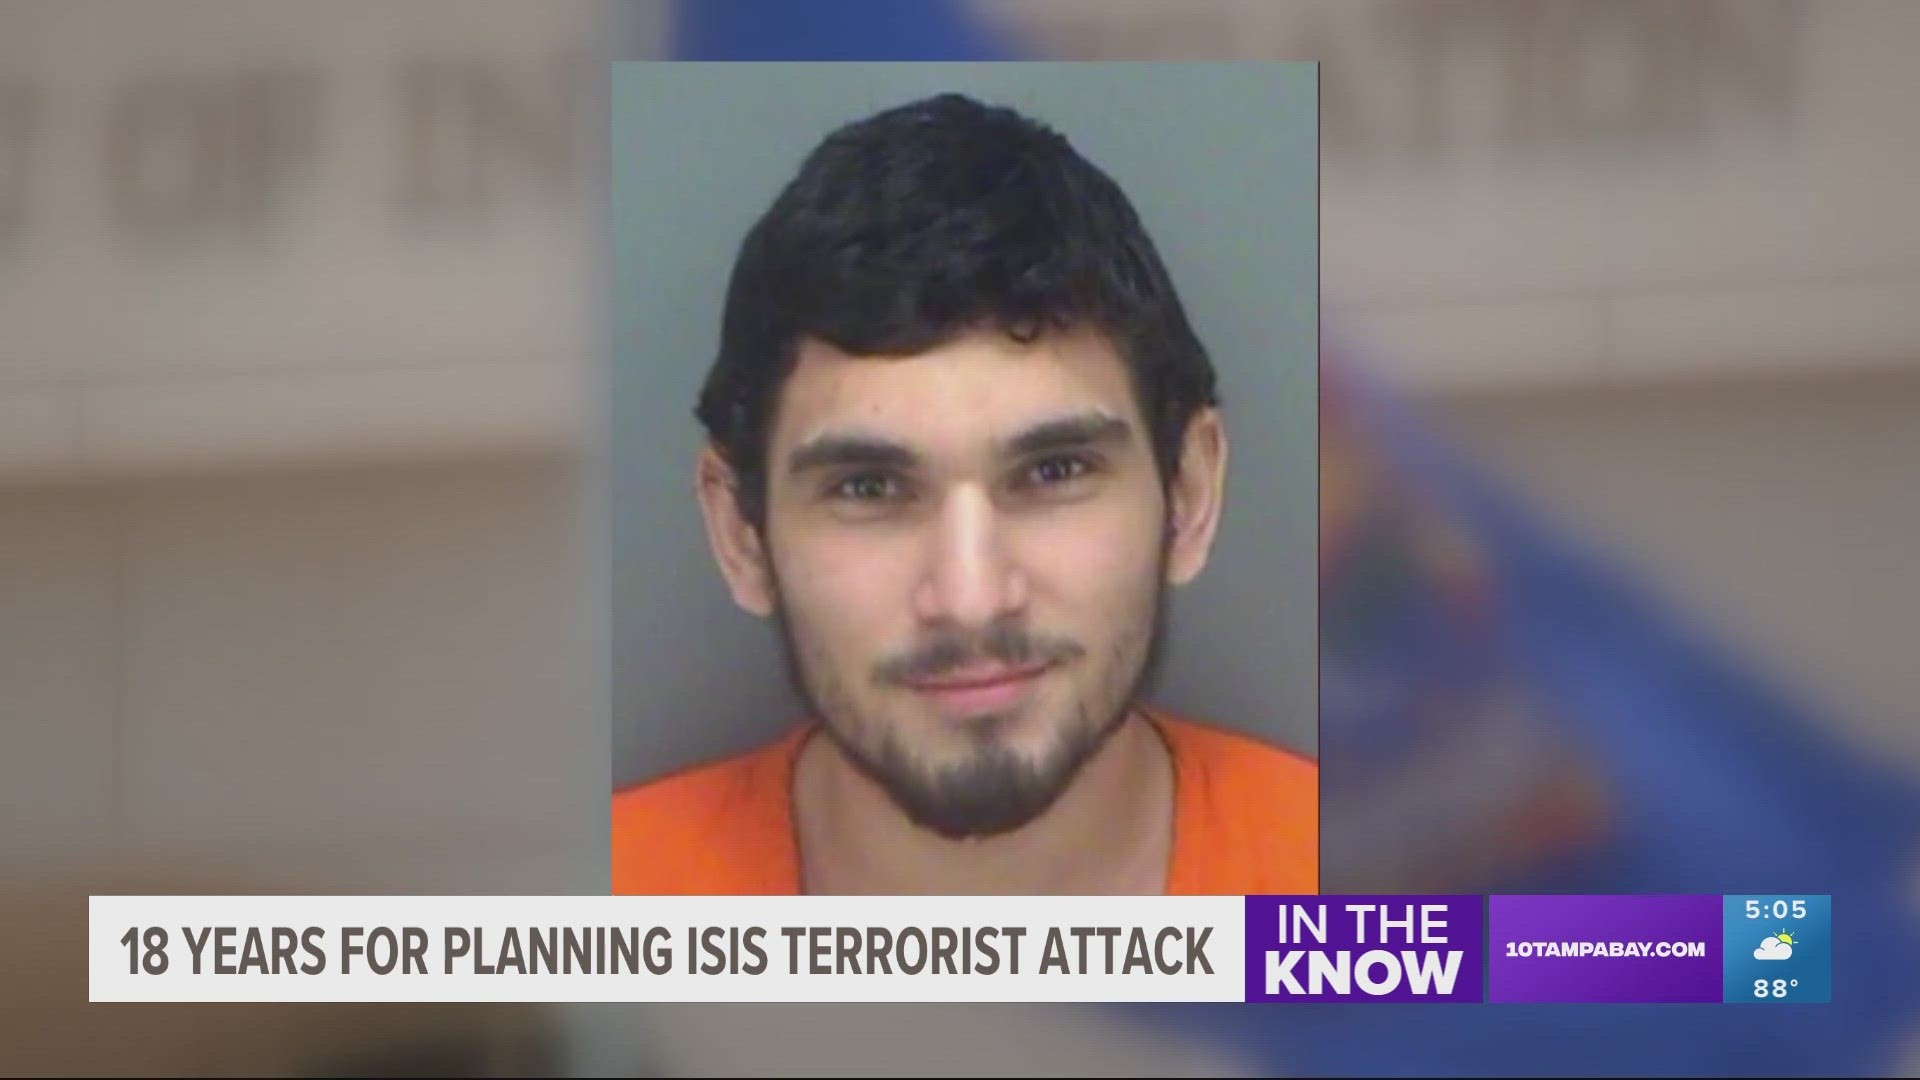 Muhammed Momtaz Al-Azhari pleaded guilty earlier this year to trying to provide guns, money to ISIS.